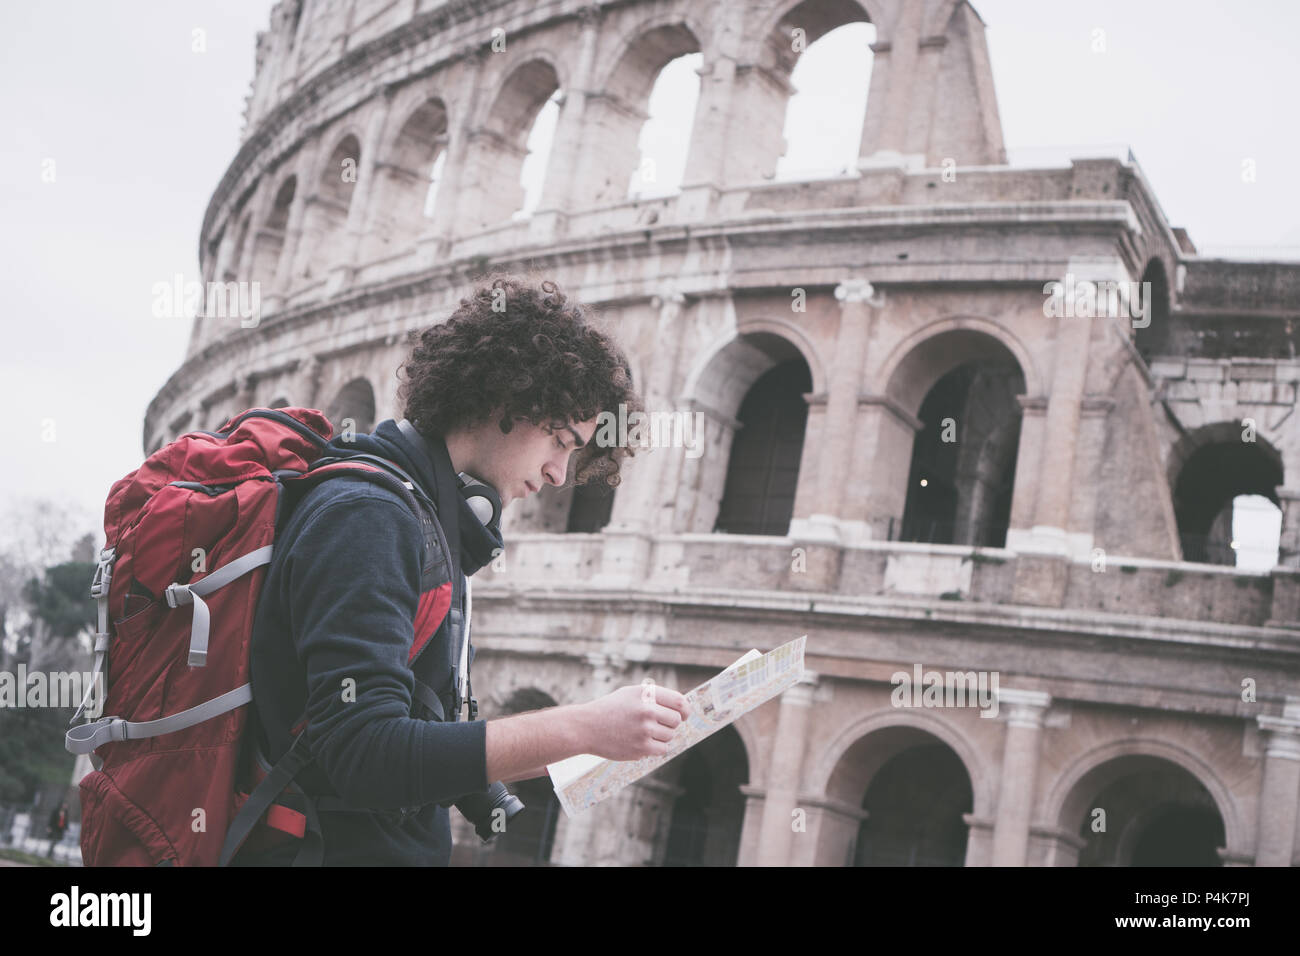 Vintage looking image of handsome young traveler looking at tourist map in Rome in front of Colosseum. Backpacker with camera and tourist map Stock Photo